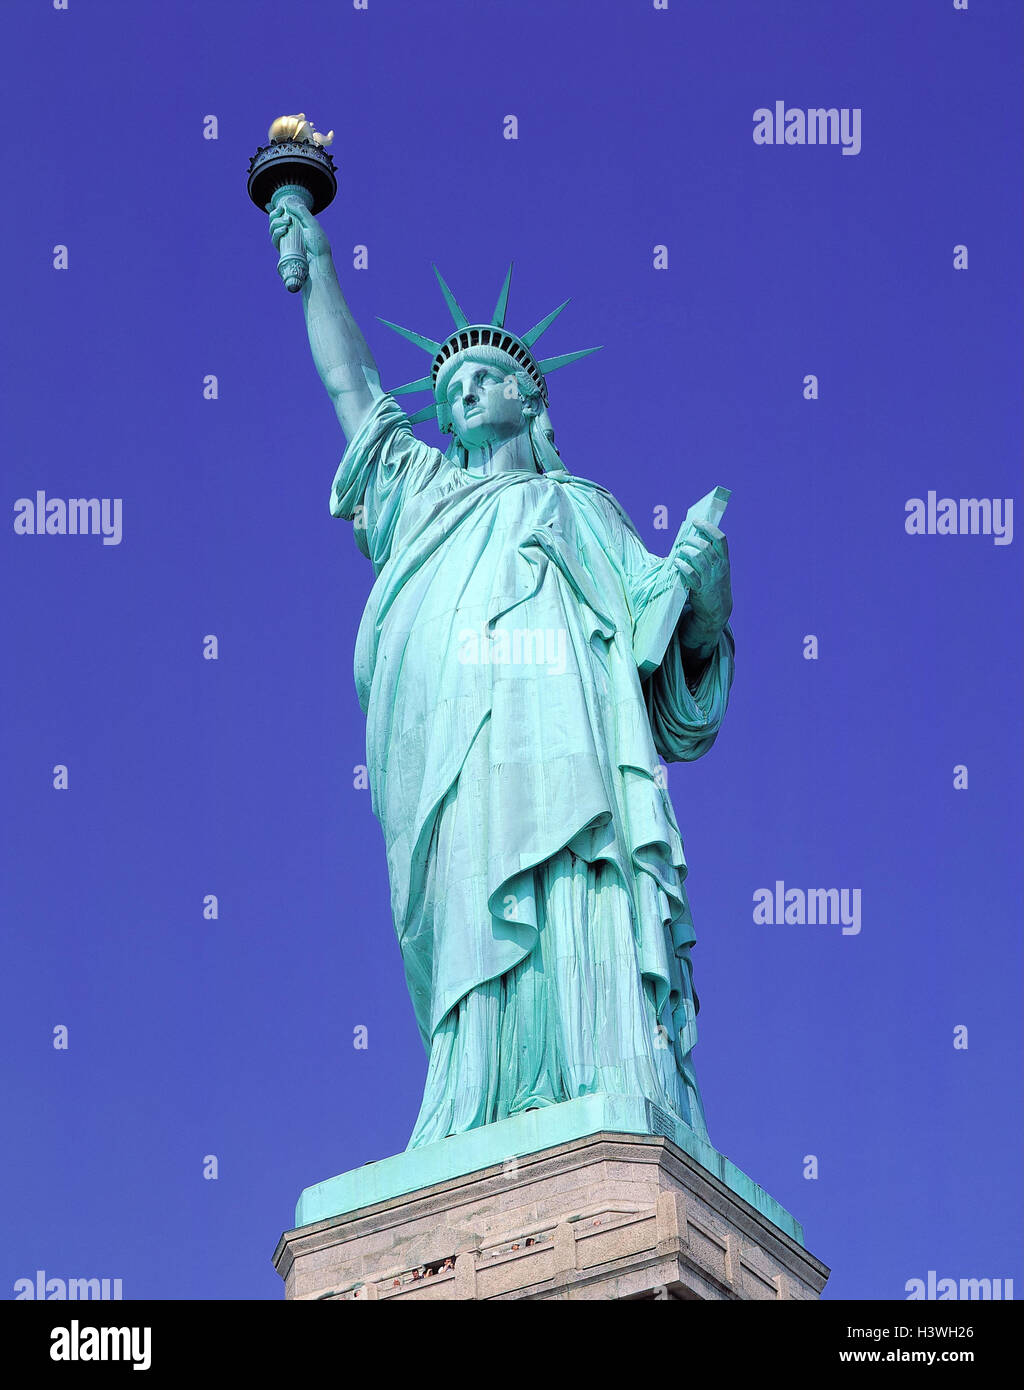 The USA, New York city, the Statue Liberty, America, cosmopolitan city, Liberty Iceland, statue Liberty, statue, height 46 m, UNESCO-world cultural heritage, landmark, culture, place of interest, tourist attraction Stock Photo